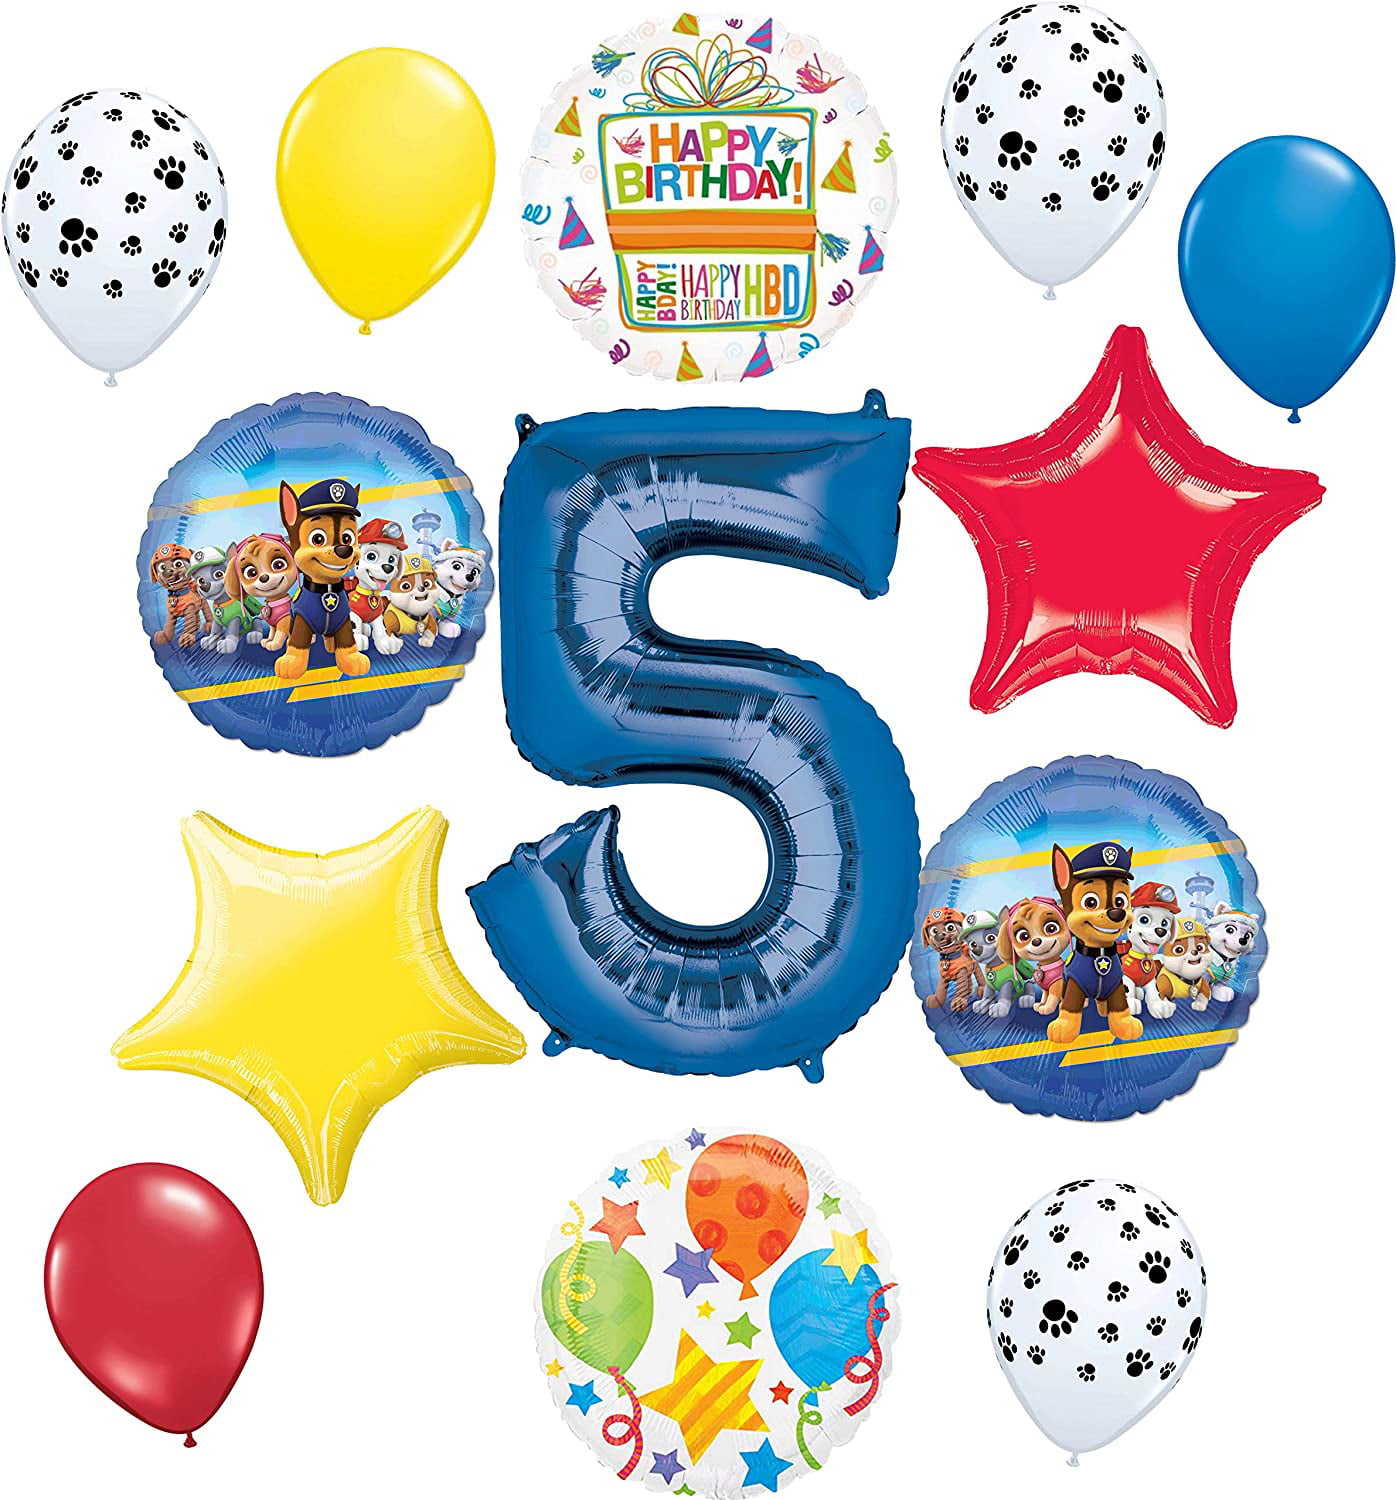 Happy 5th BirthdayBlue & Silver Holographic 18" Party Foil Balloon 1-5pk 